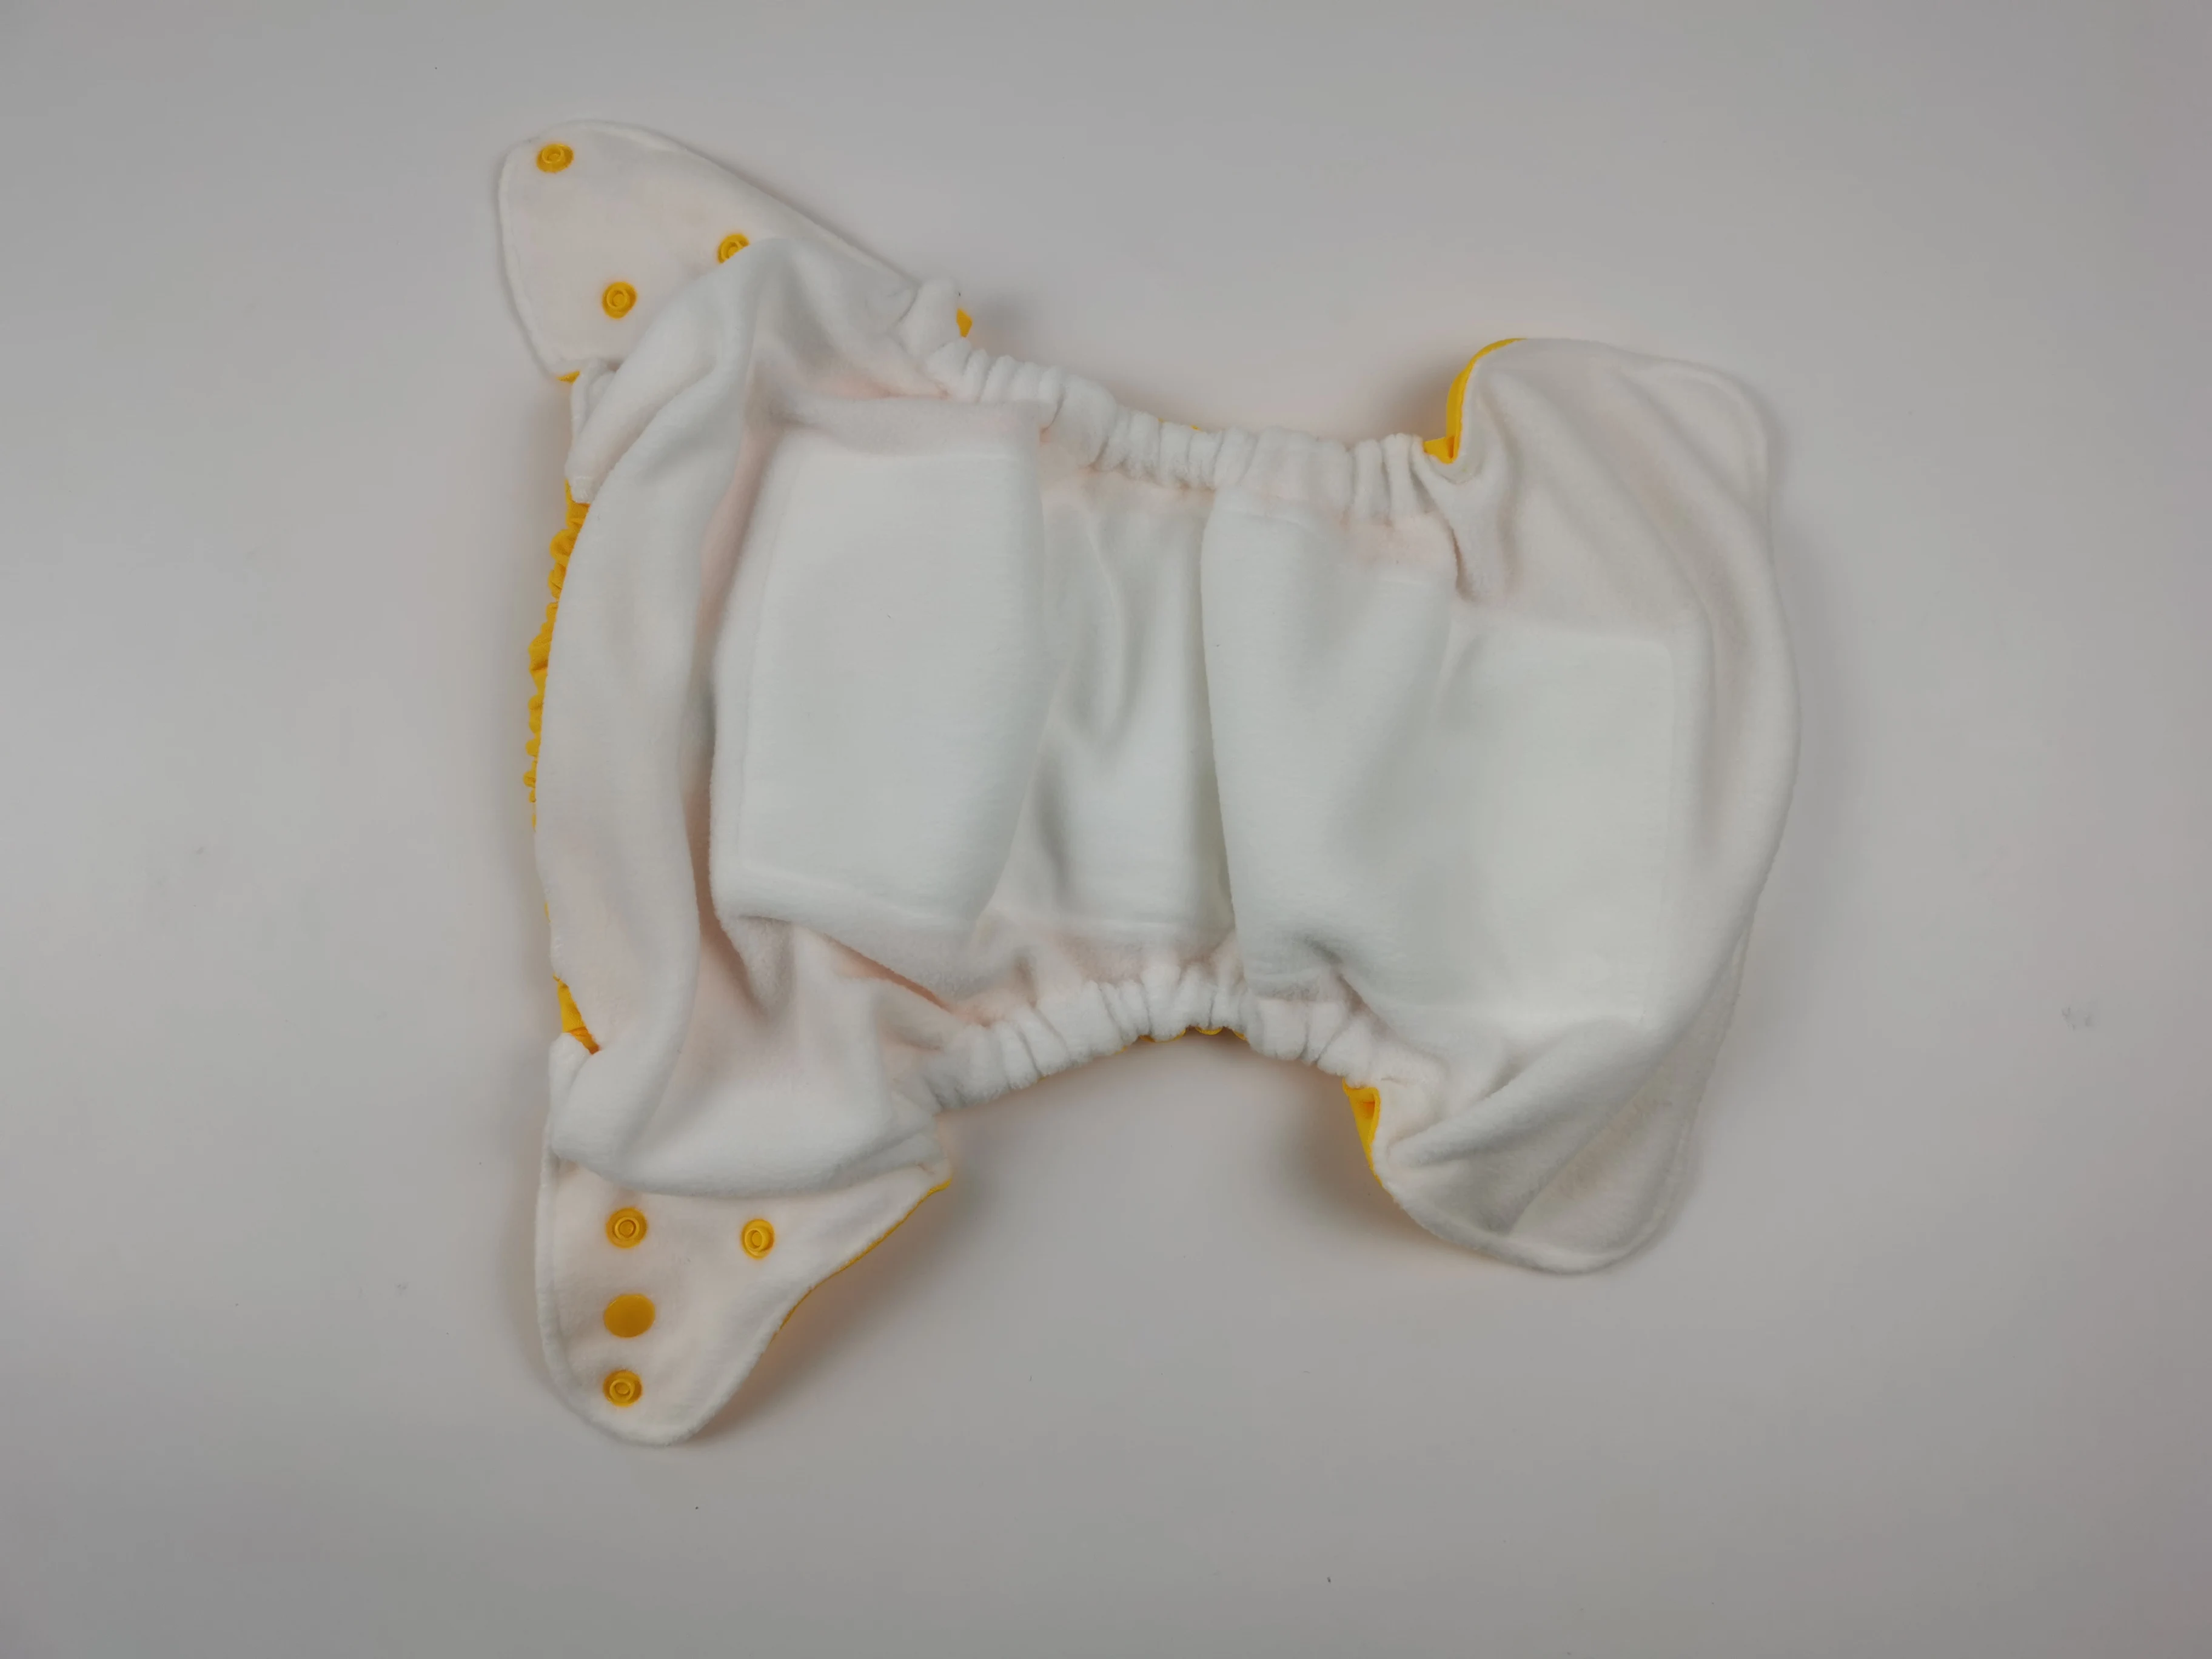 BEST Quality Naughty Baby Cloth Diapers Adjustable Reusable Pocket AIO Nappy 30PCS FREE shipping